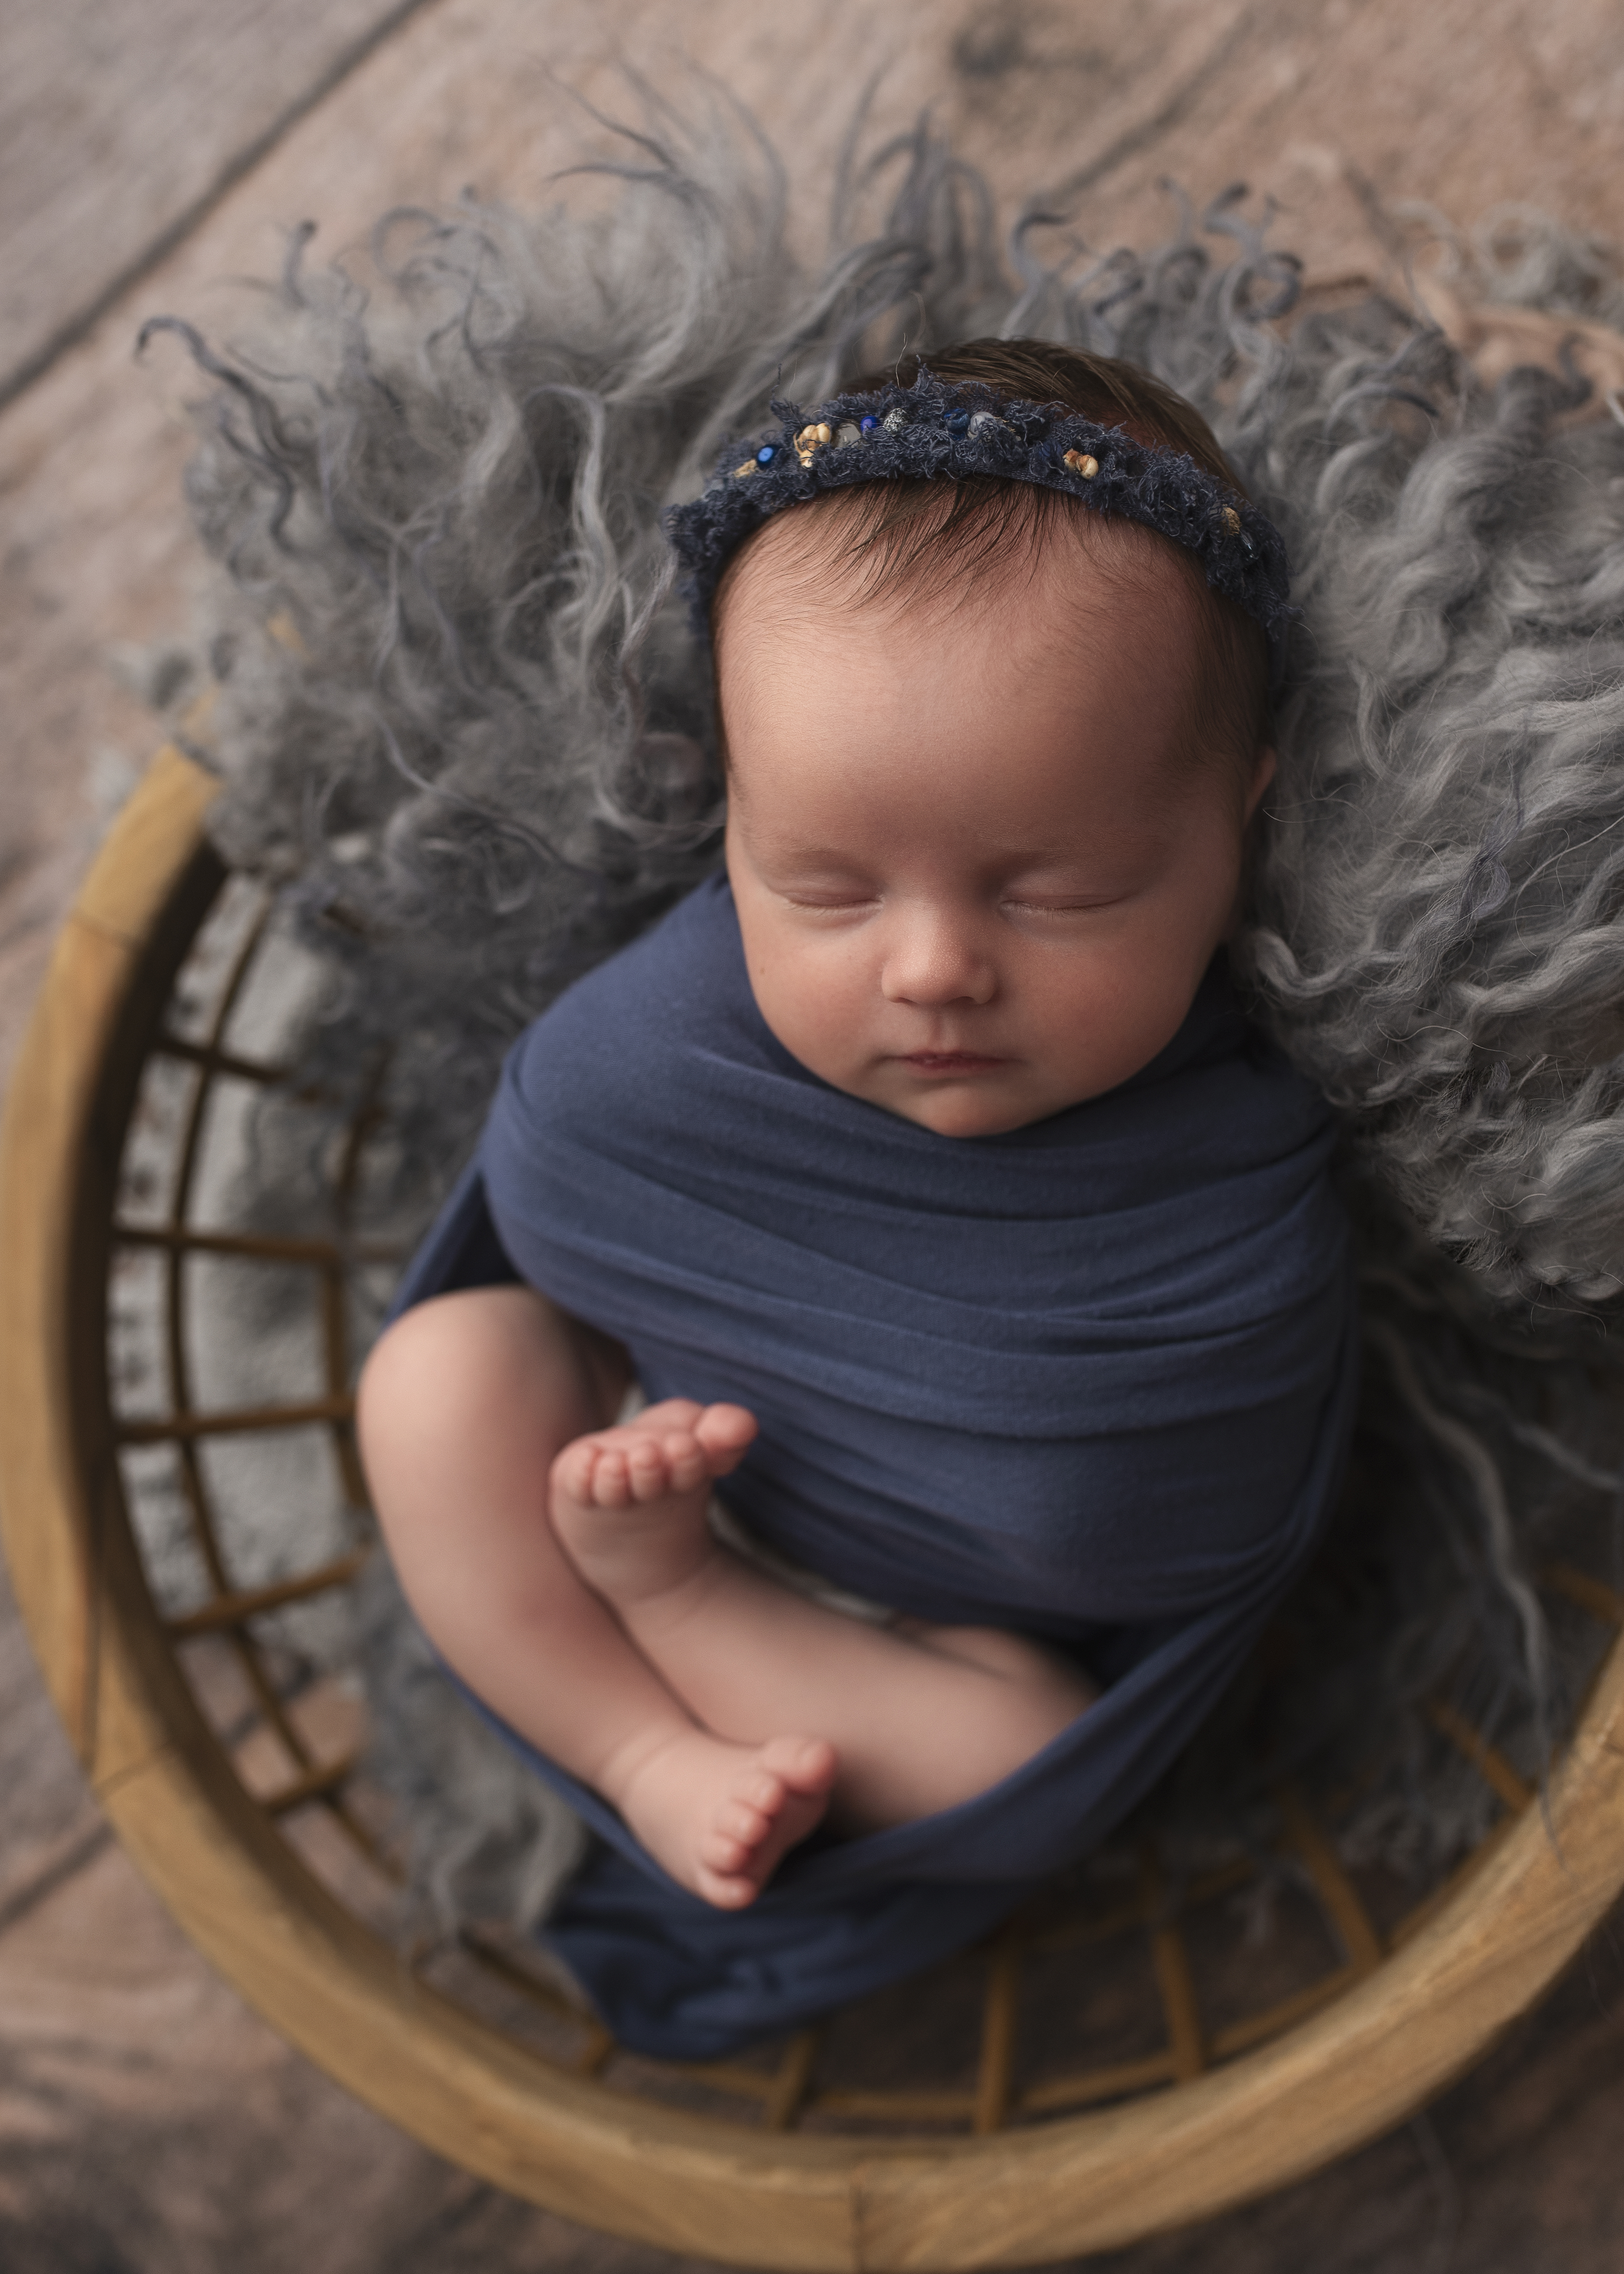 grand rapids newborn photo session baby sleeping wrapped in blue swaddle